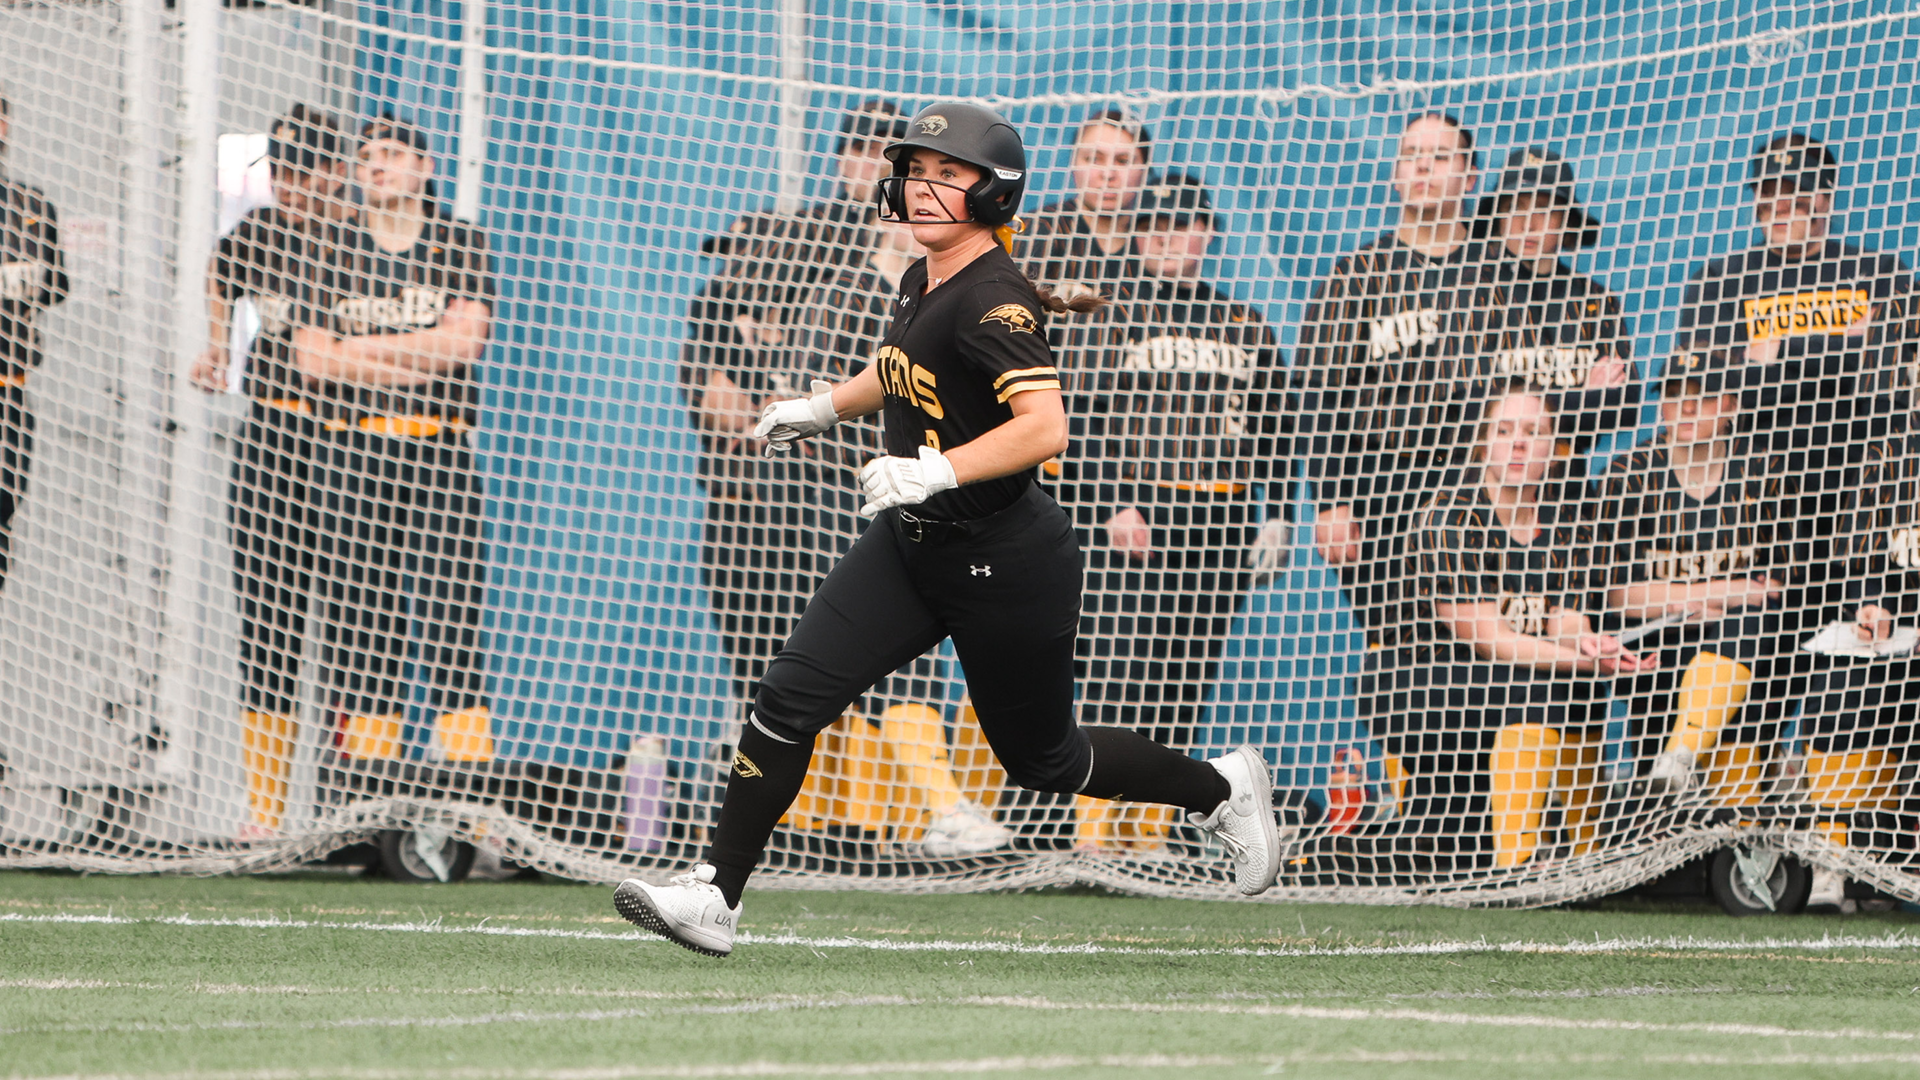 Morgan Rau scored four runs and recorded three RBIs with two doubles in the Titans' wins on Tuesday. Photo Credit: Morgan Feltz, UW-Oshkosh Sports Information